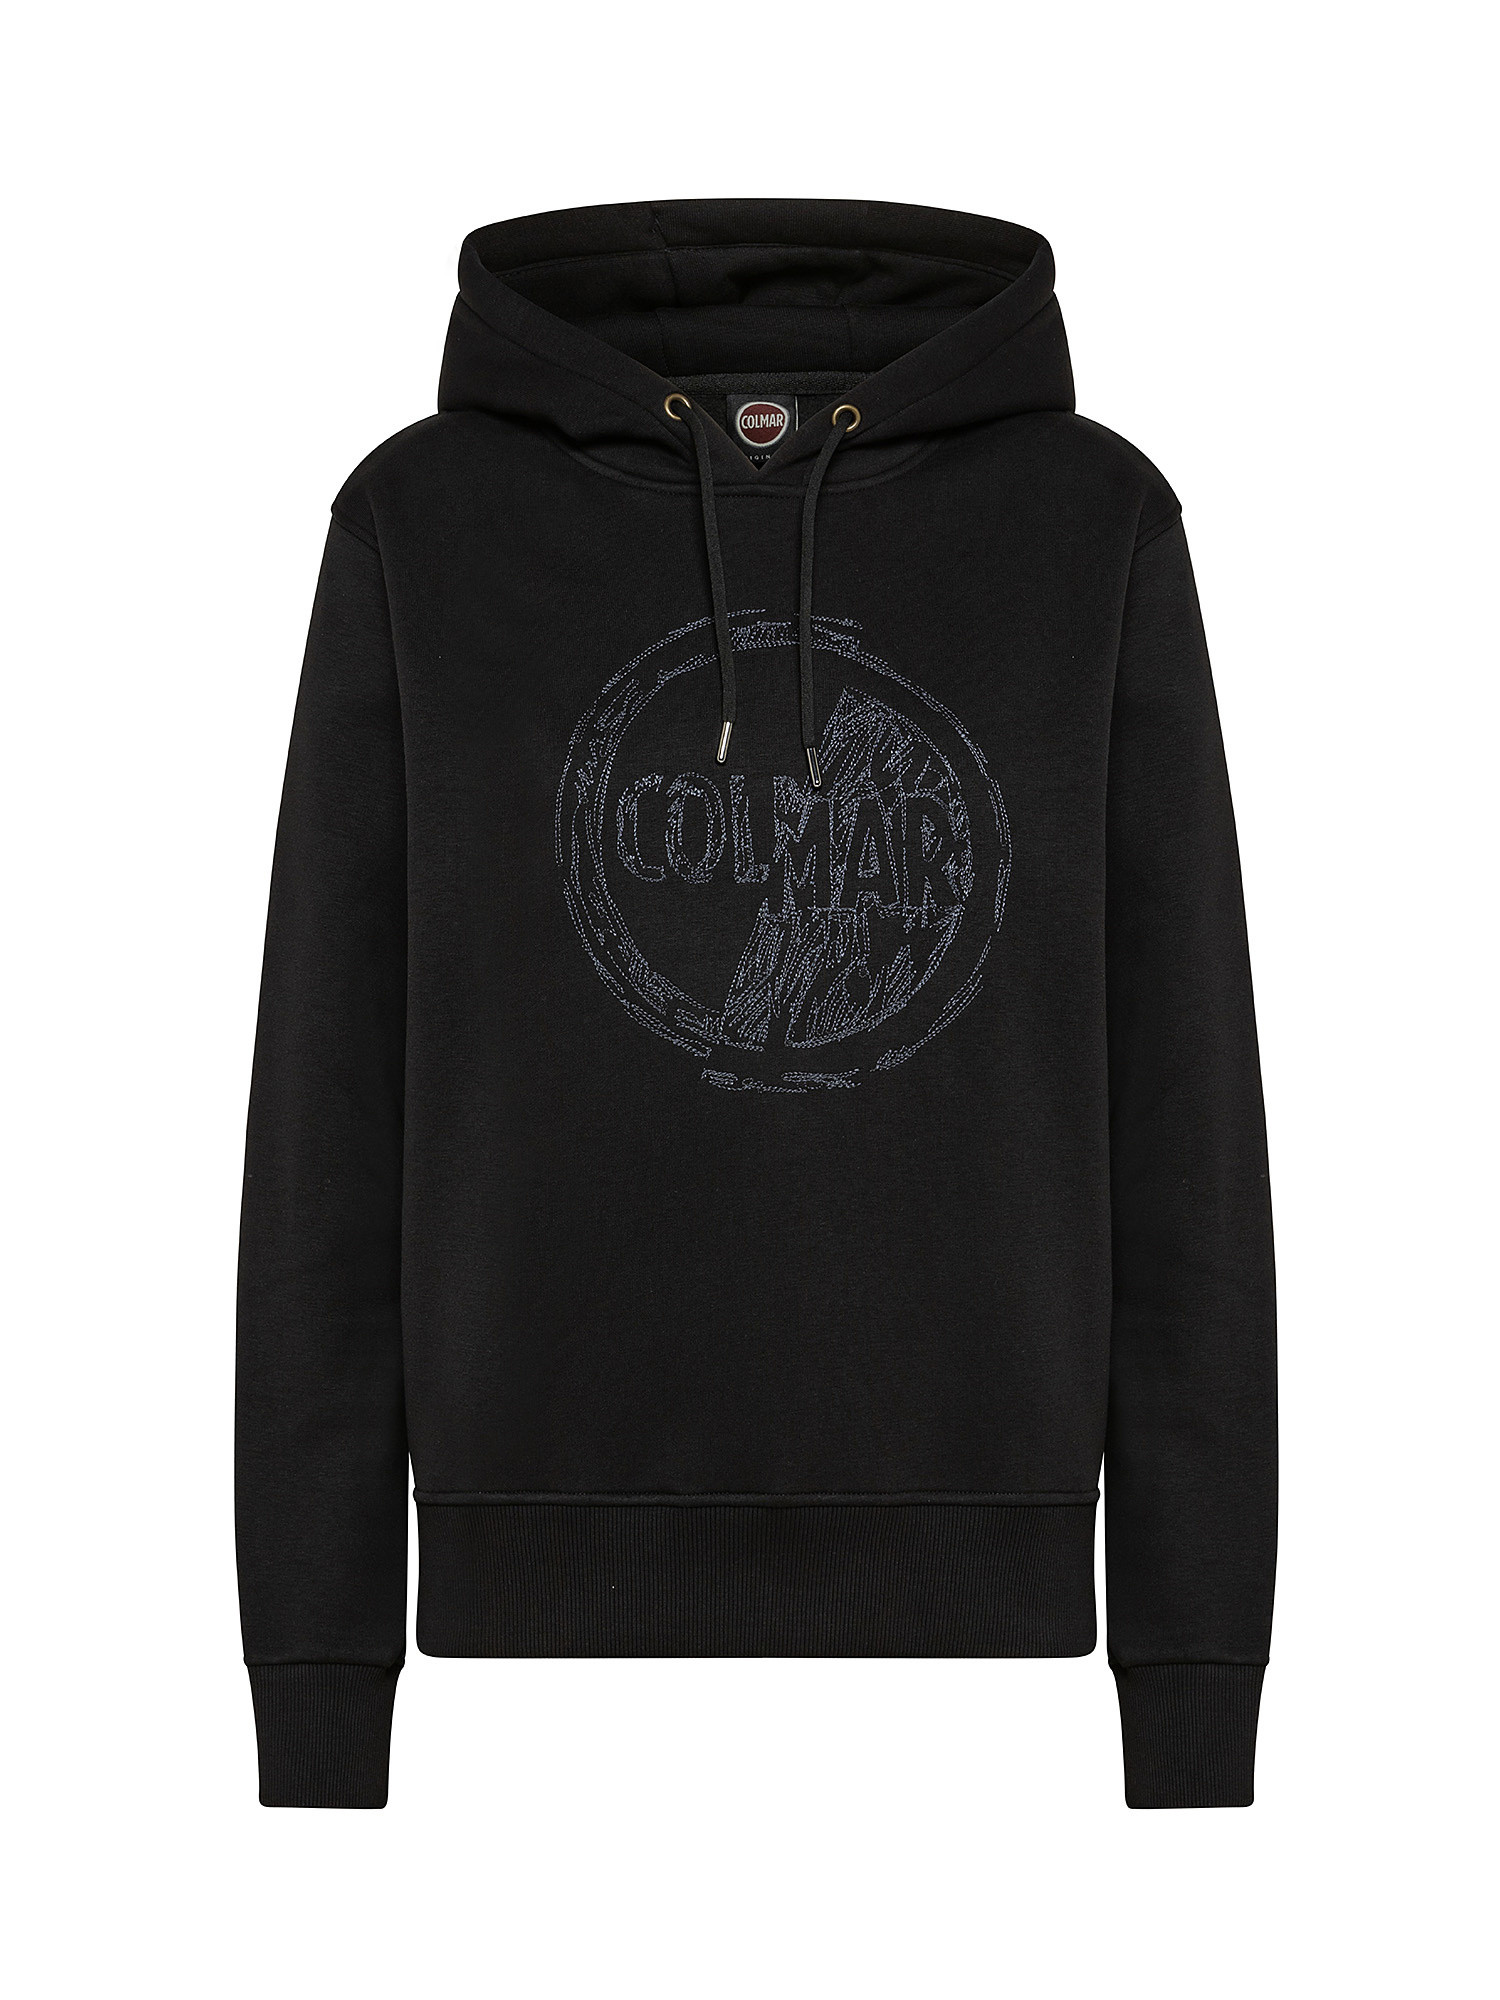 Hoodie sweatshirt with embroidery on chest, Black, large image number 0